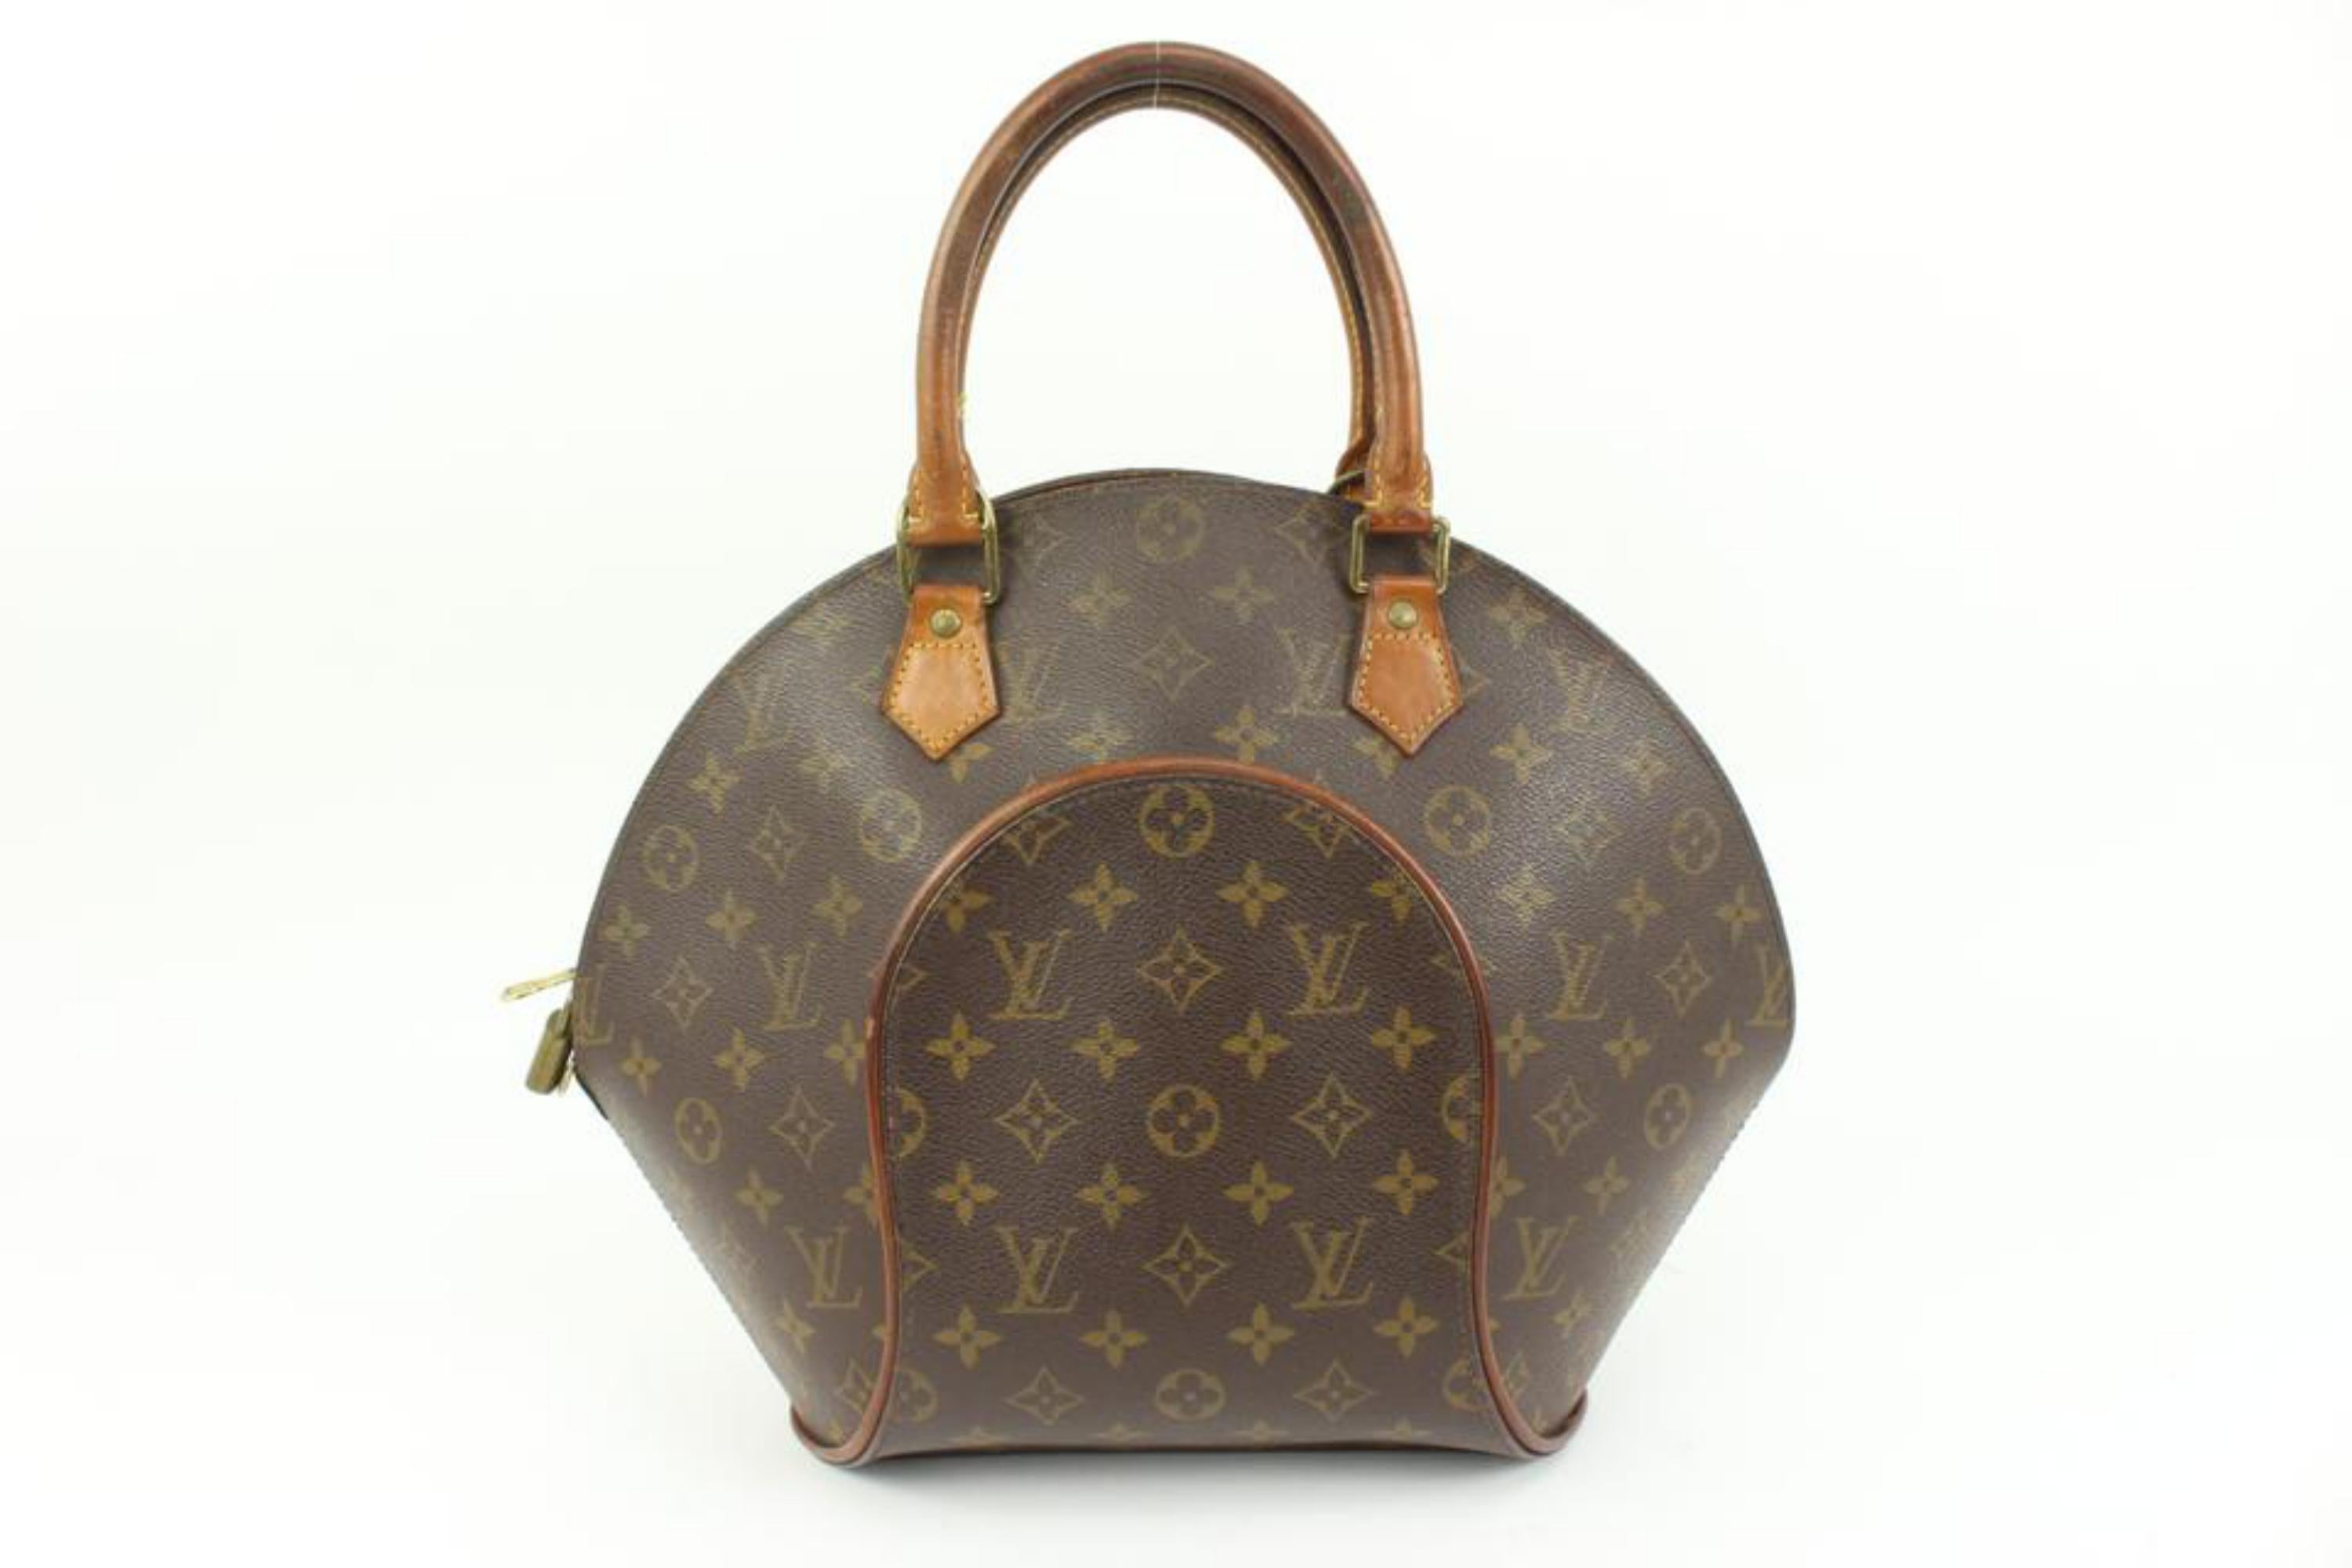 Louis Vuitton Monogram Ellipse MM Seashell Bowler Bag 94lk328s In Good Condition For Sale In Dix hills, NY